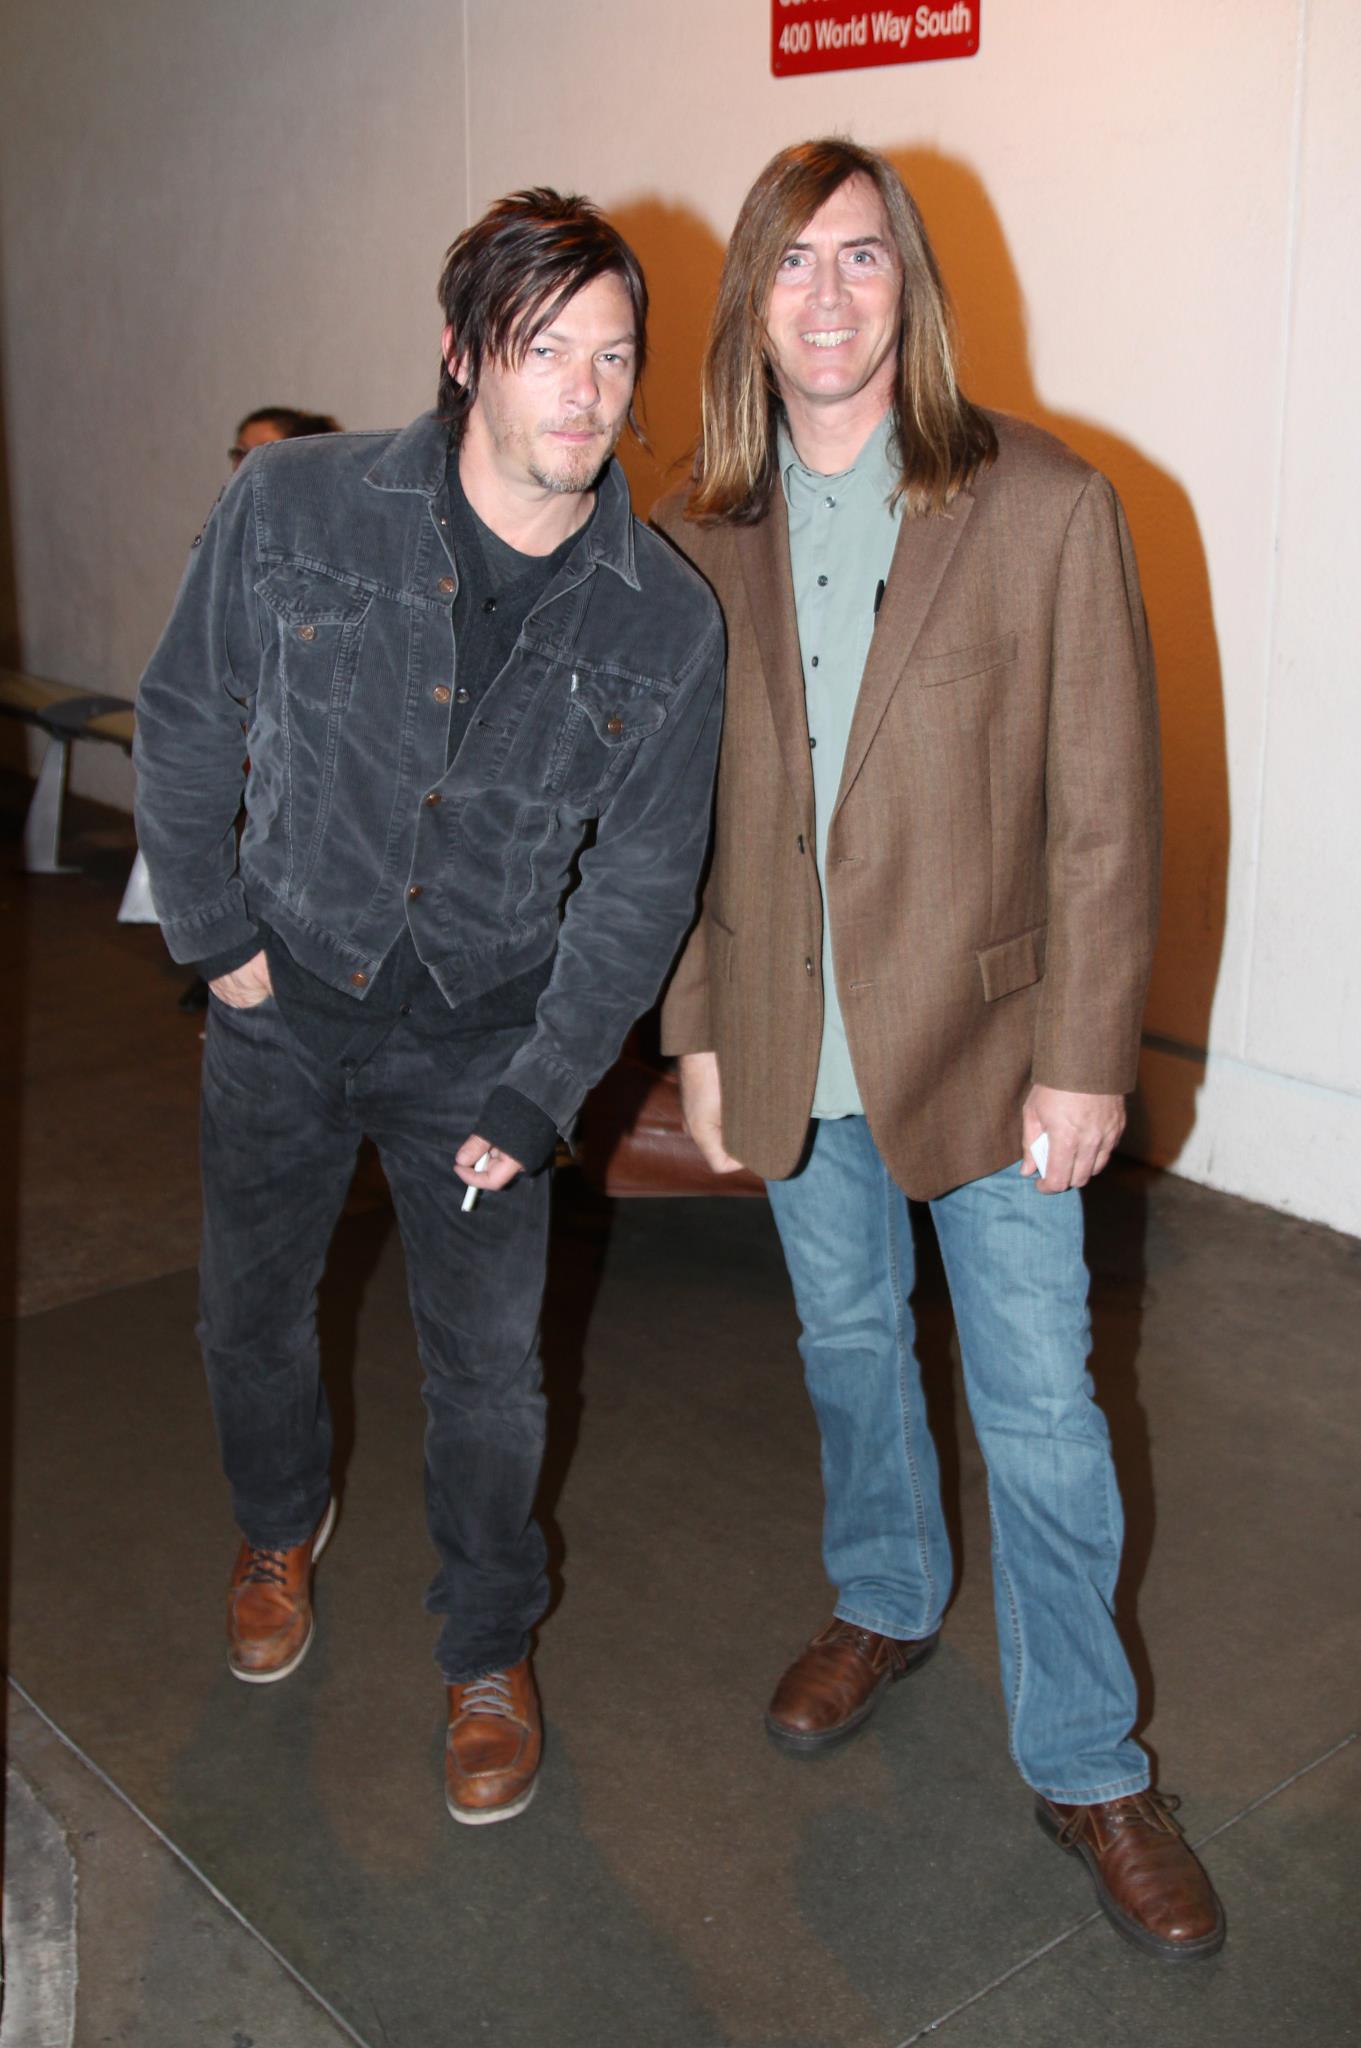 With Norman Reedus from AMC's 